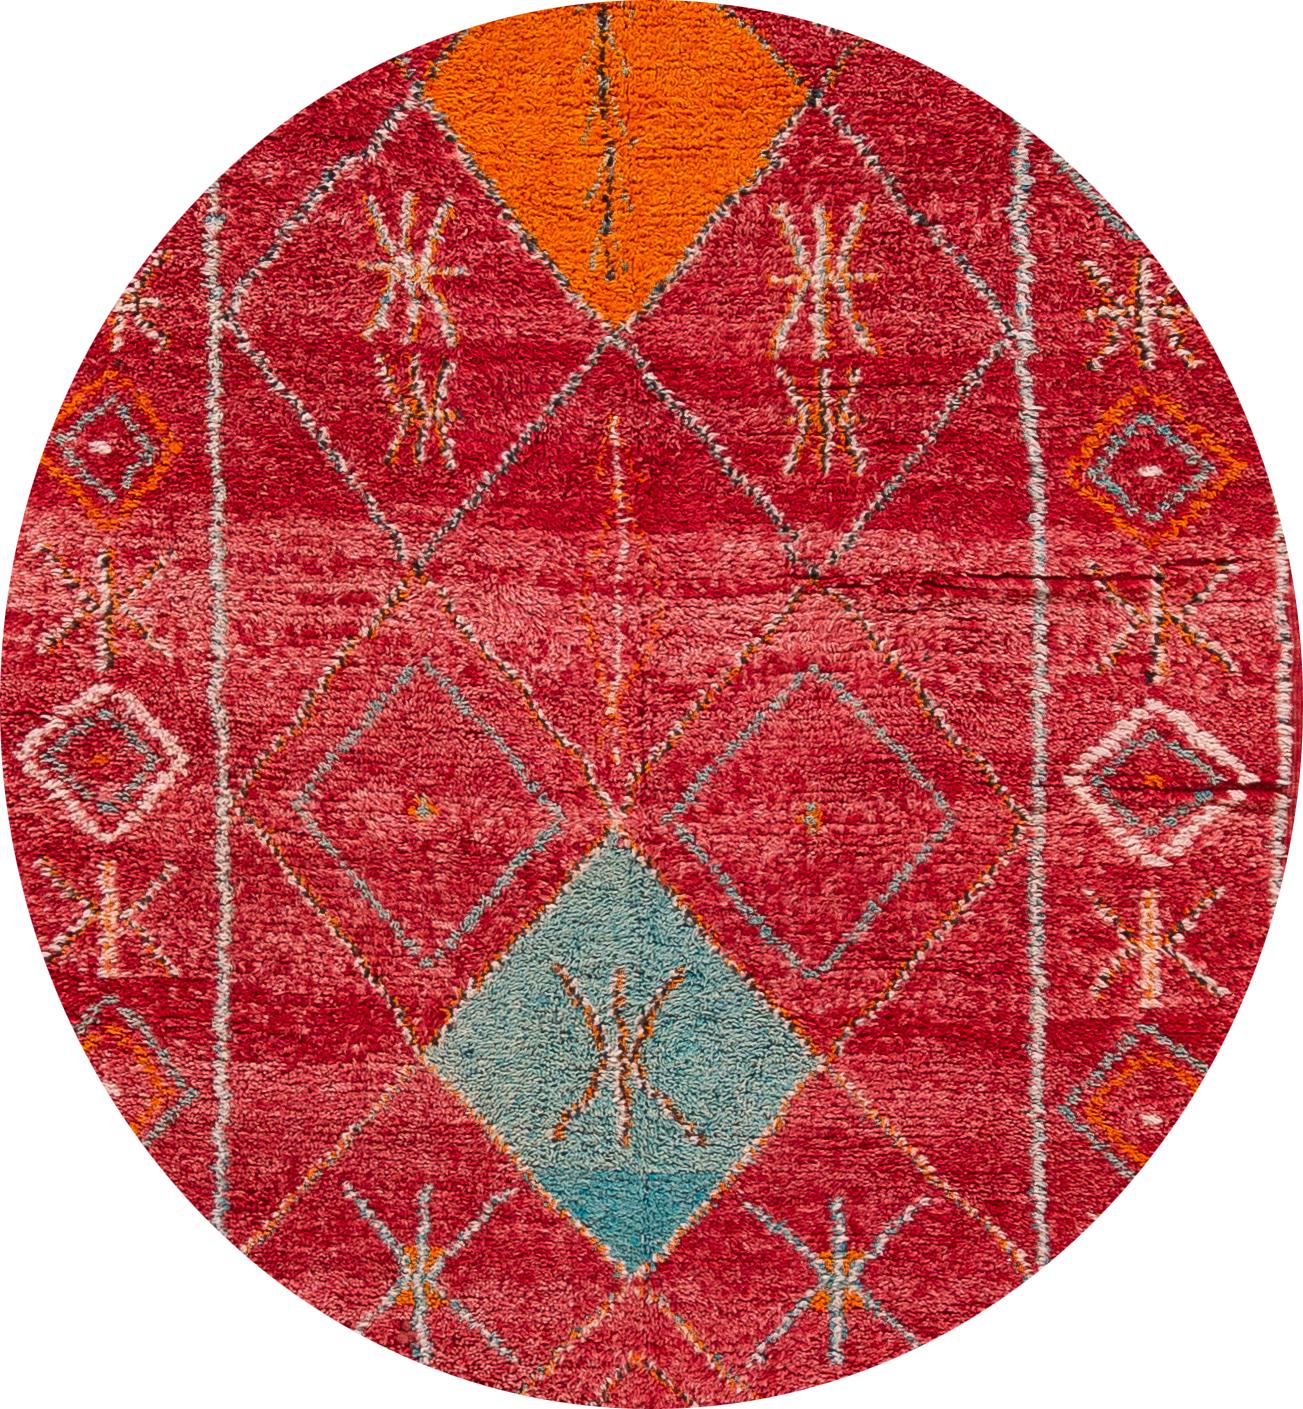 Beautiful vintage Moroccan Scatter rug, hand knotted wool with a bright red field, orange and blue accents in multi medallion design,
circa 1980.
This rug measures 4' 7